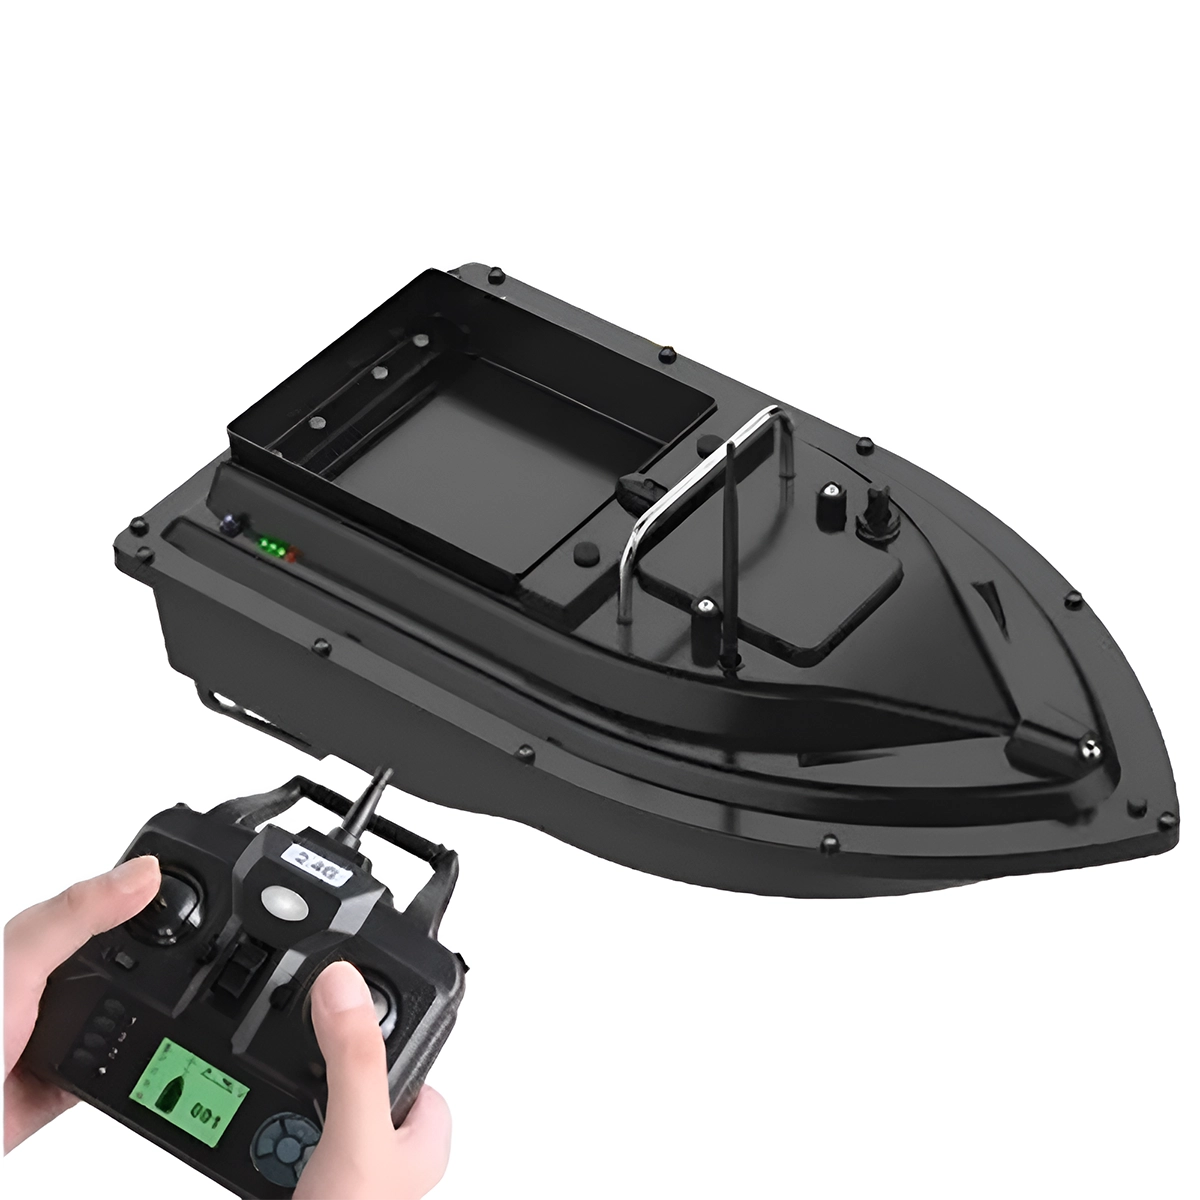 https://vwoo.com/wp-content/uploads/2024/04/Smart-GPS-Remote-Control-Fishing-Bait-Boat-for-Fishing-remote-control-and-product.webp